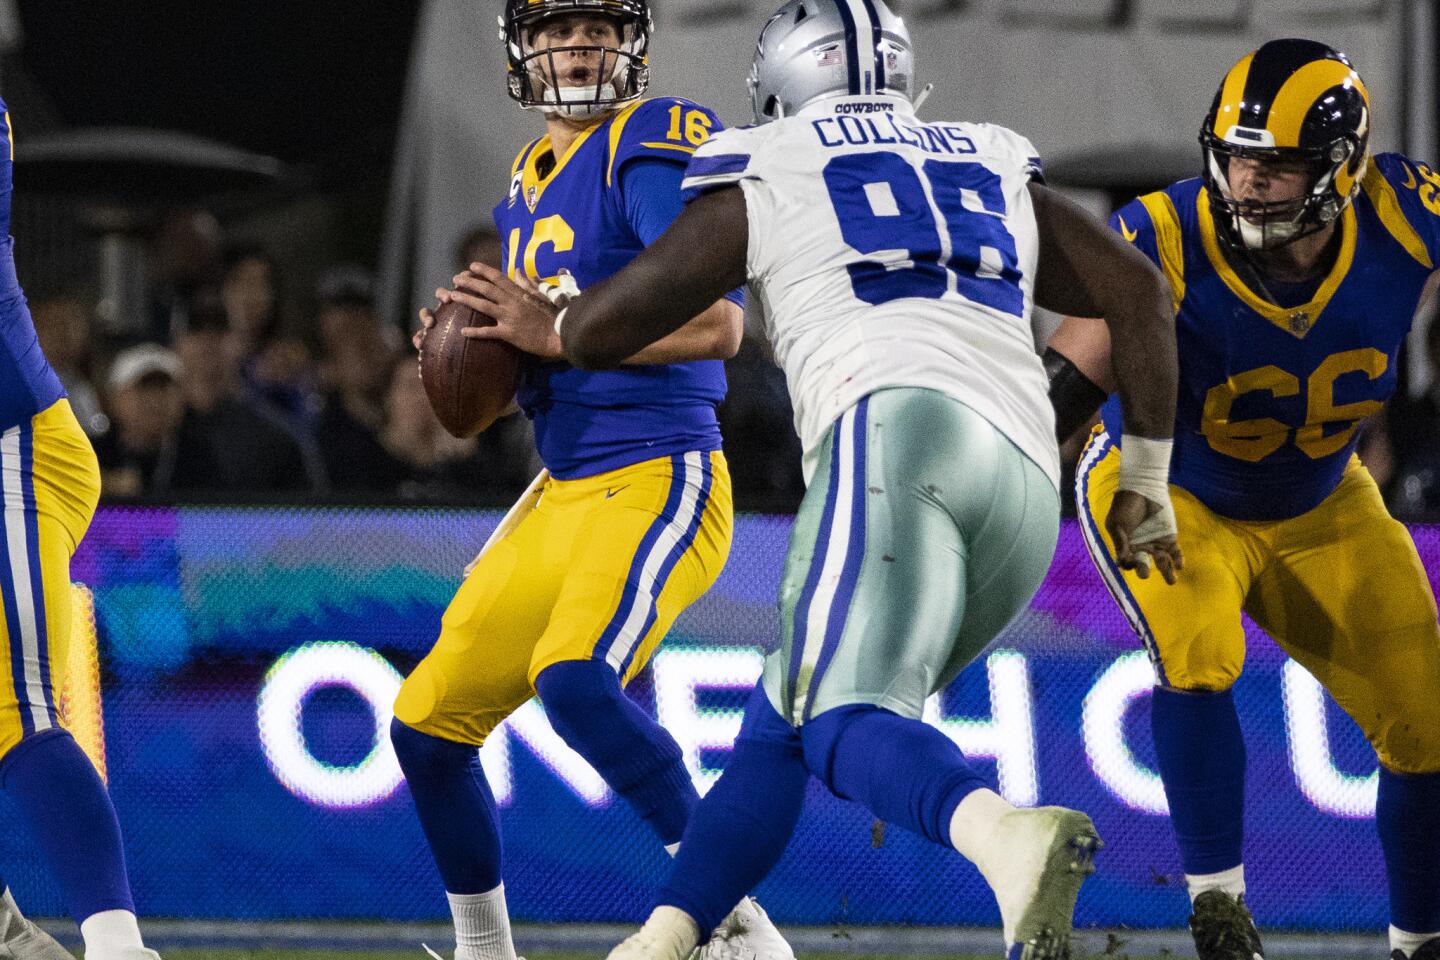 Rams quarterback Jared Goff (16) looks for an open receiver as Cowboys defensive tackle Maliek Collins applies pressure.